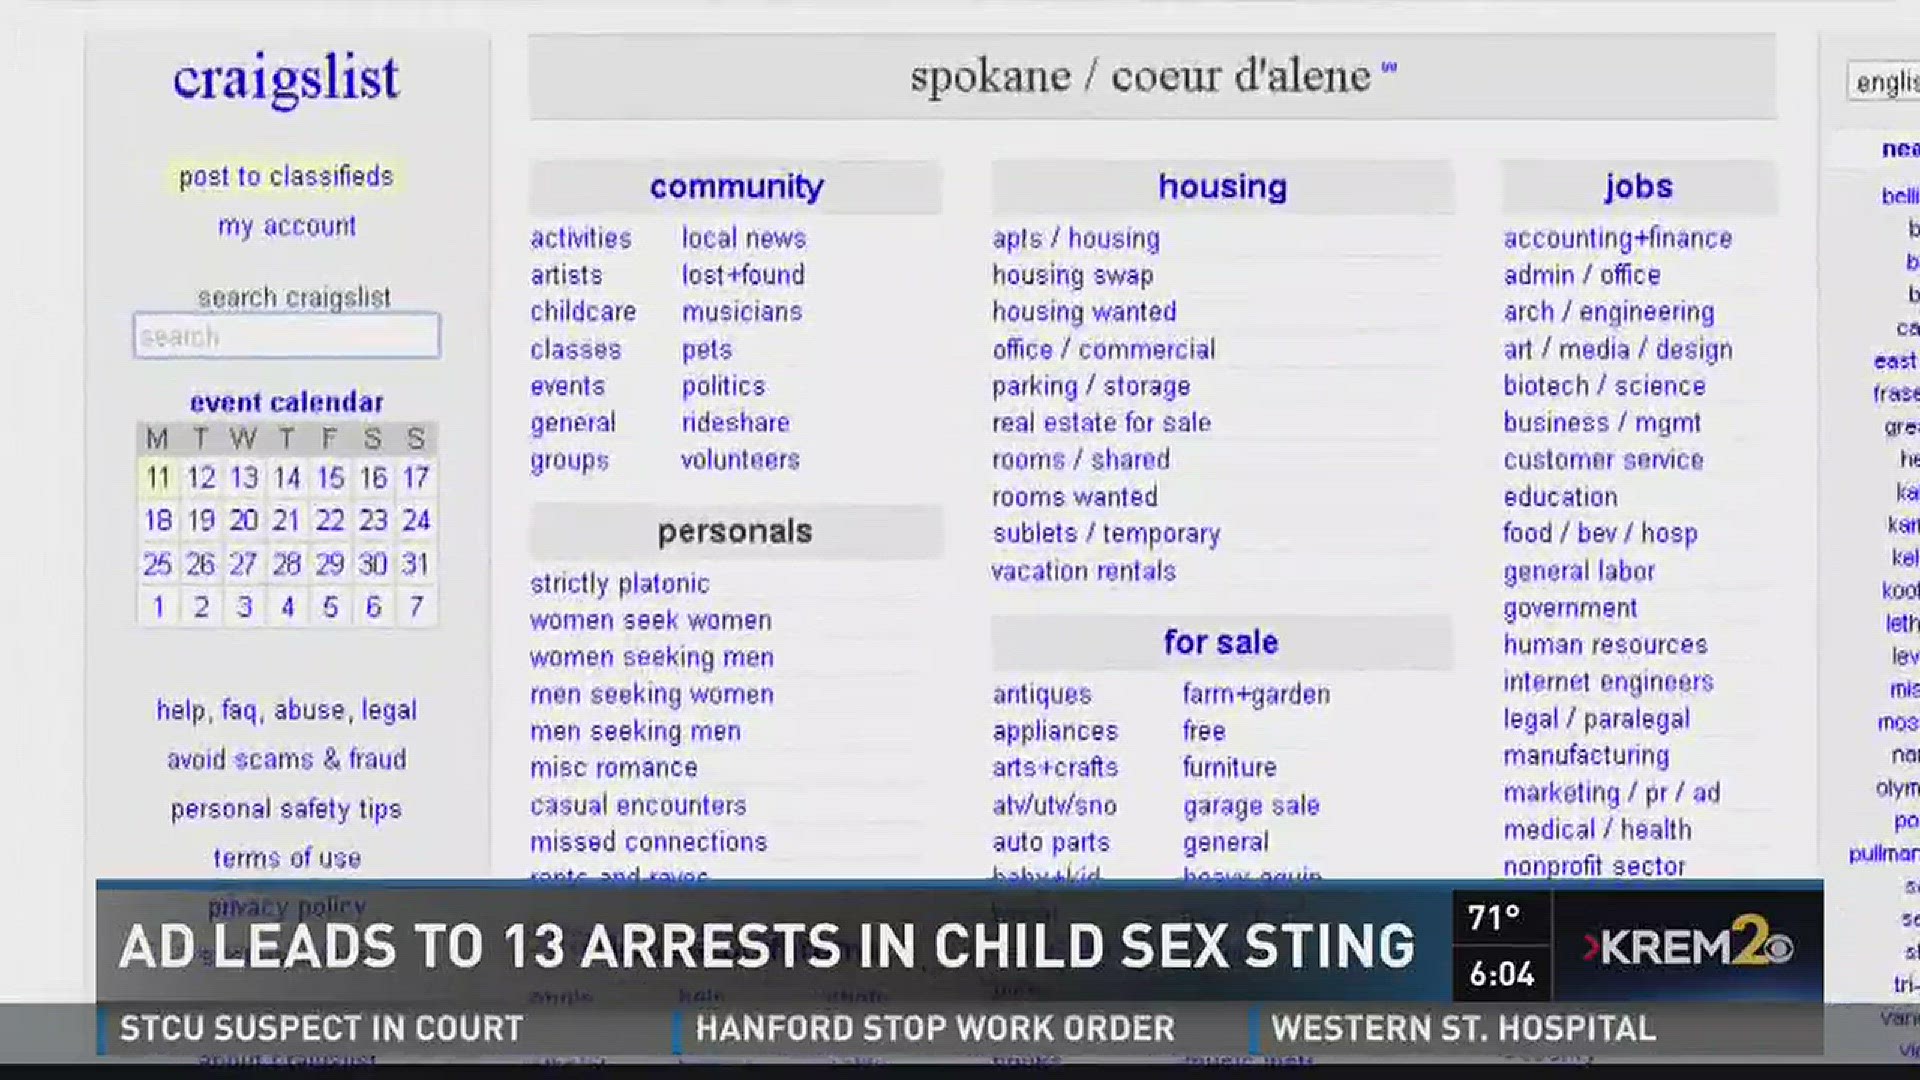 A sting operation across Washington called "Operation Net Nanny" resulted in the arrests of 40 people who responded to an ad for sex with kids.